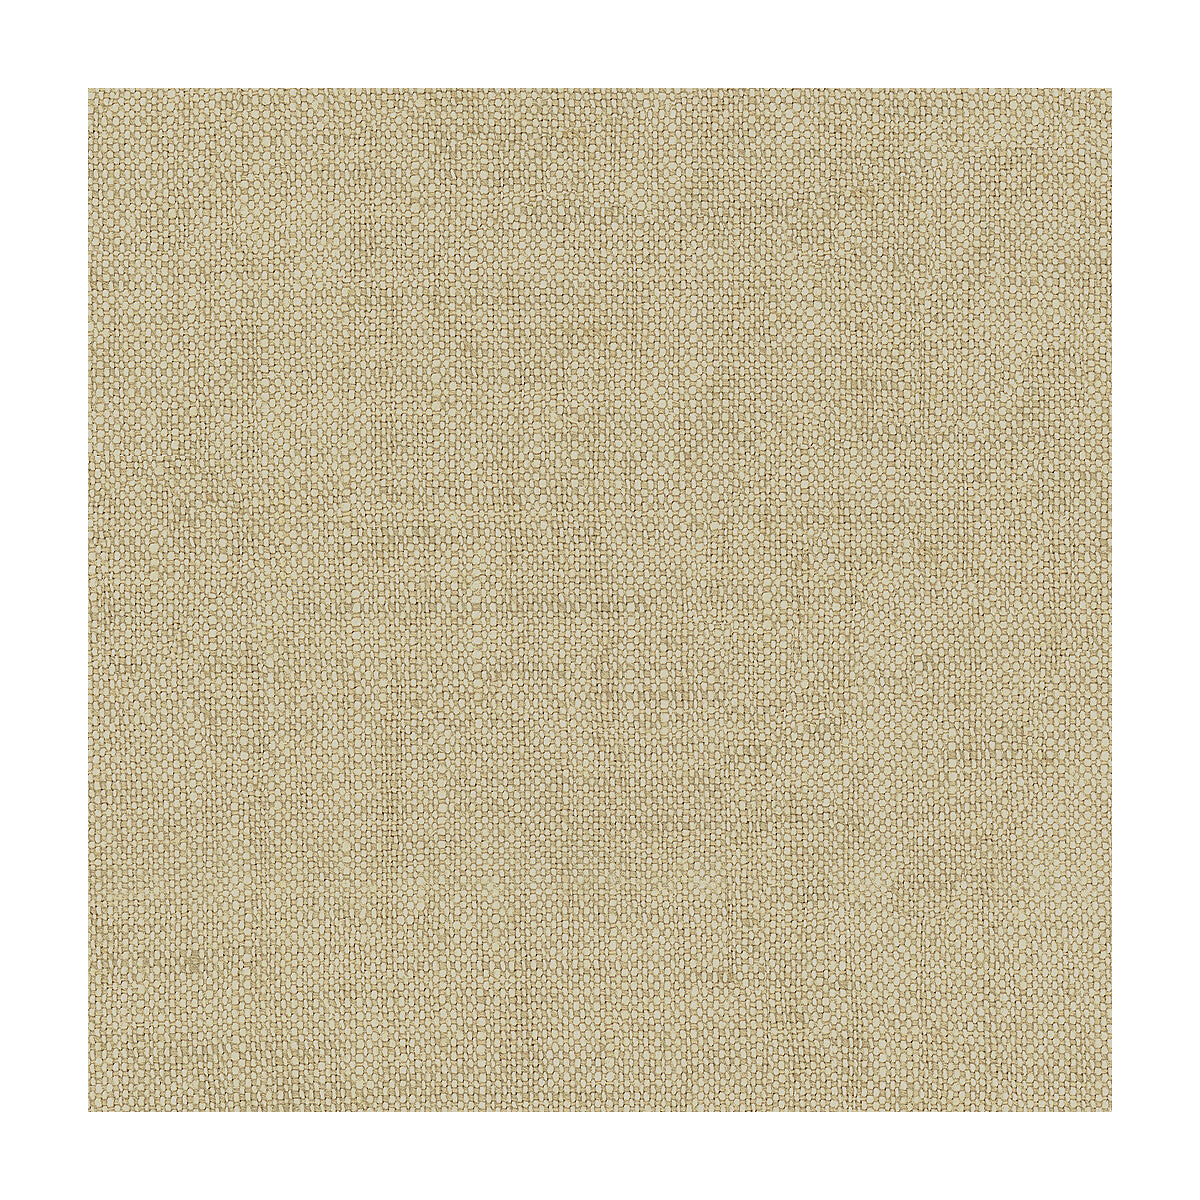 Kravet Basics fabric in 33773-52 color - pattern 33773.52.0 - by Kravet Basics in the Perfect Plains collection